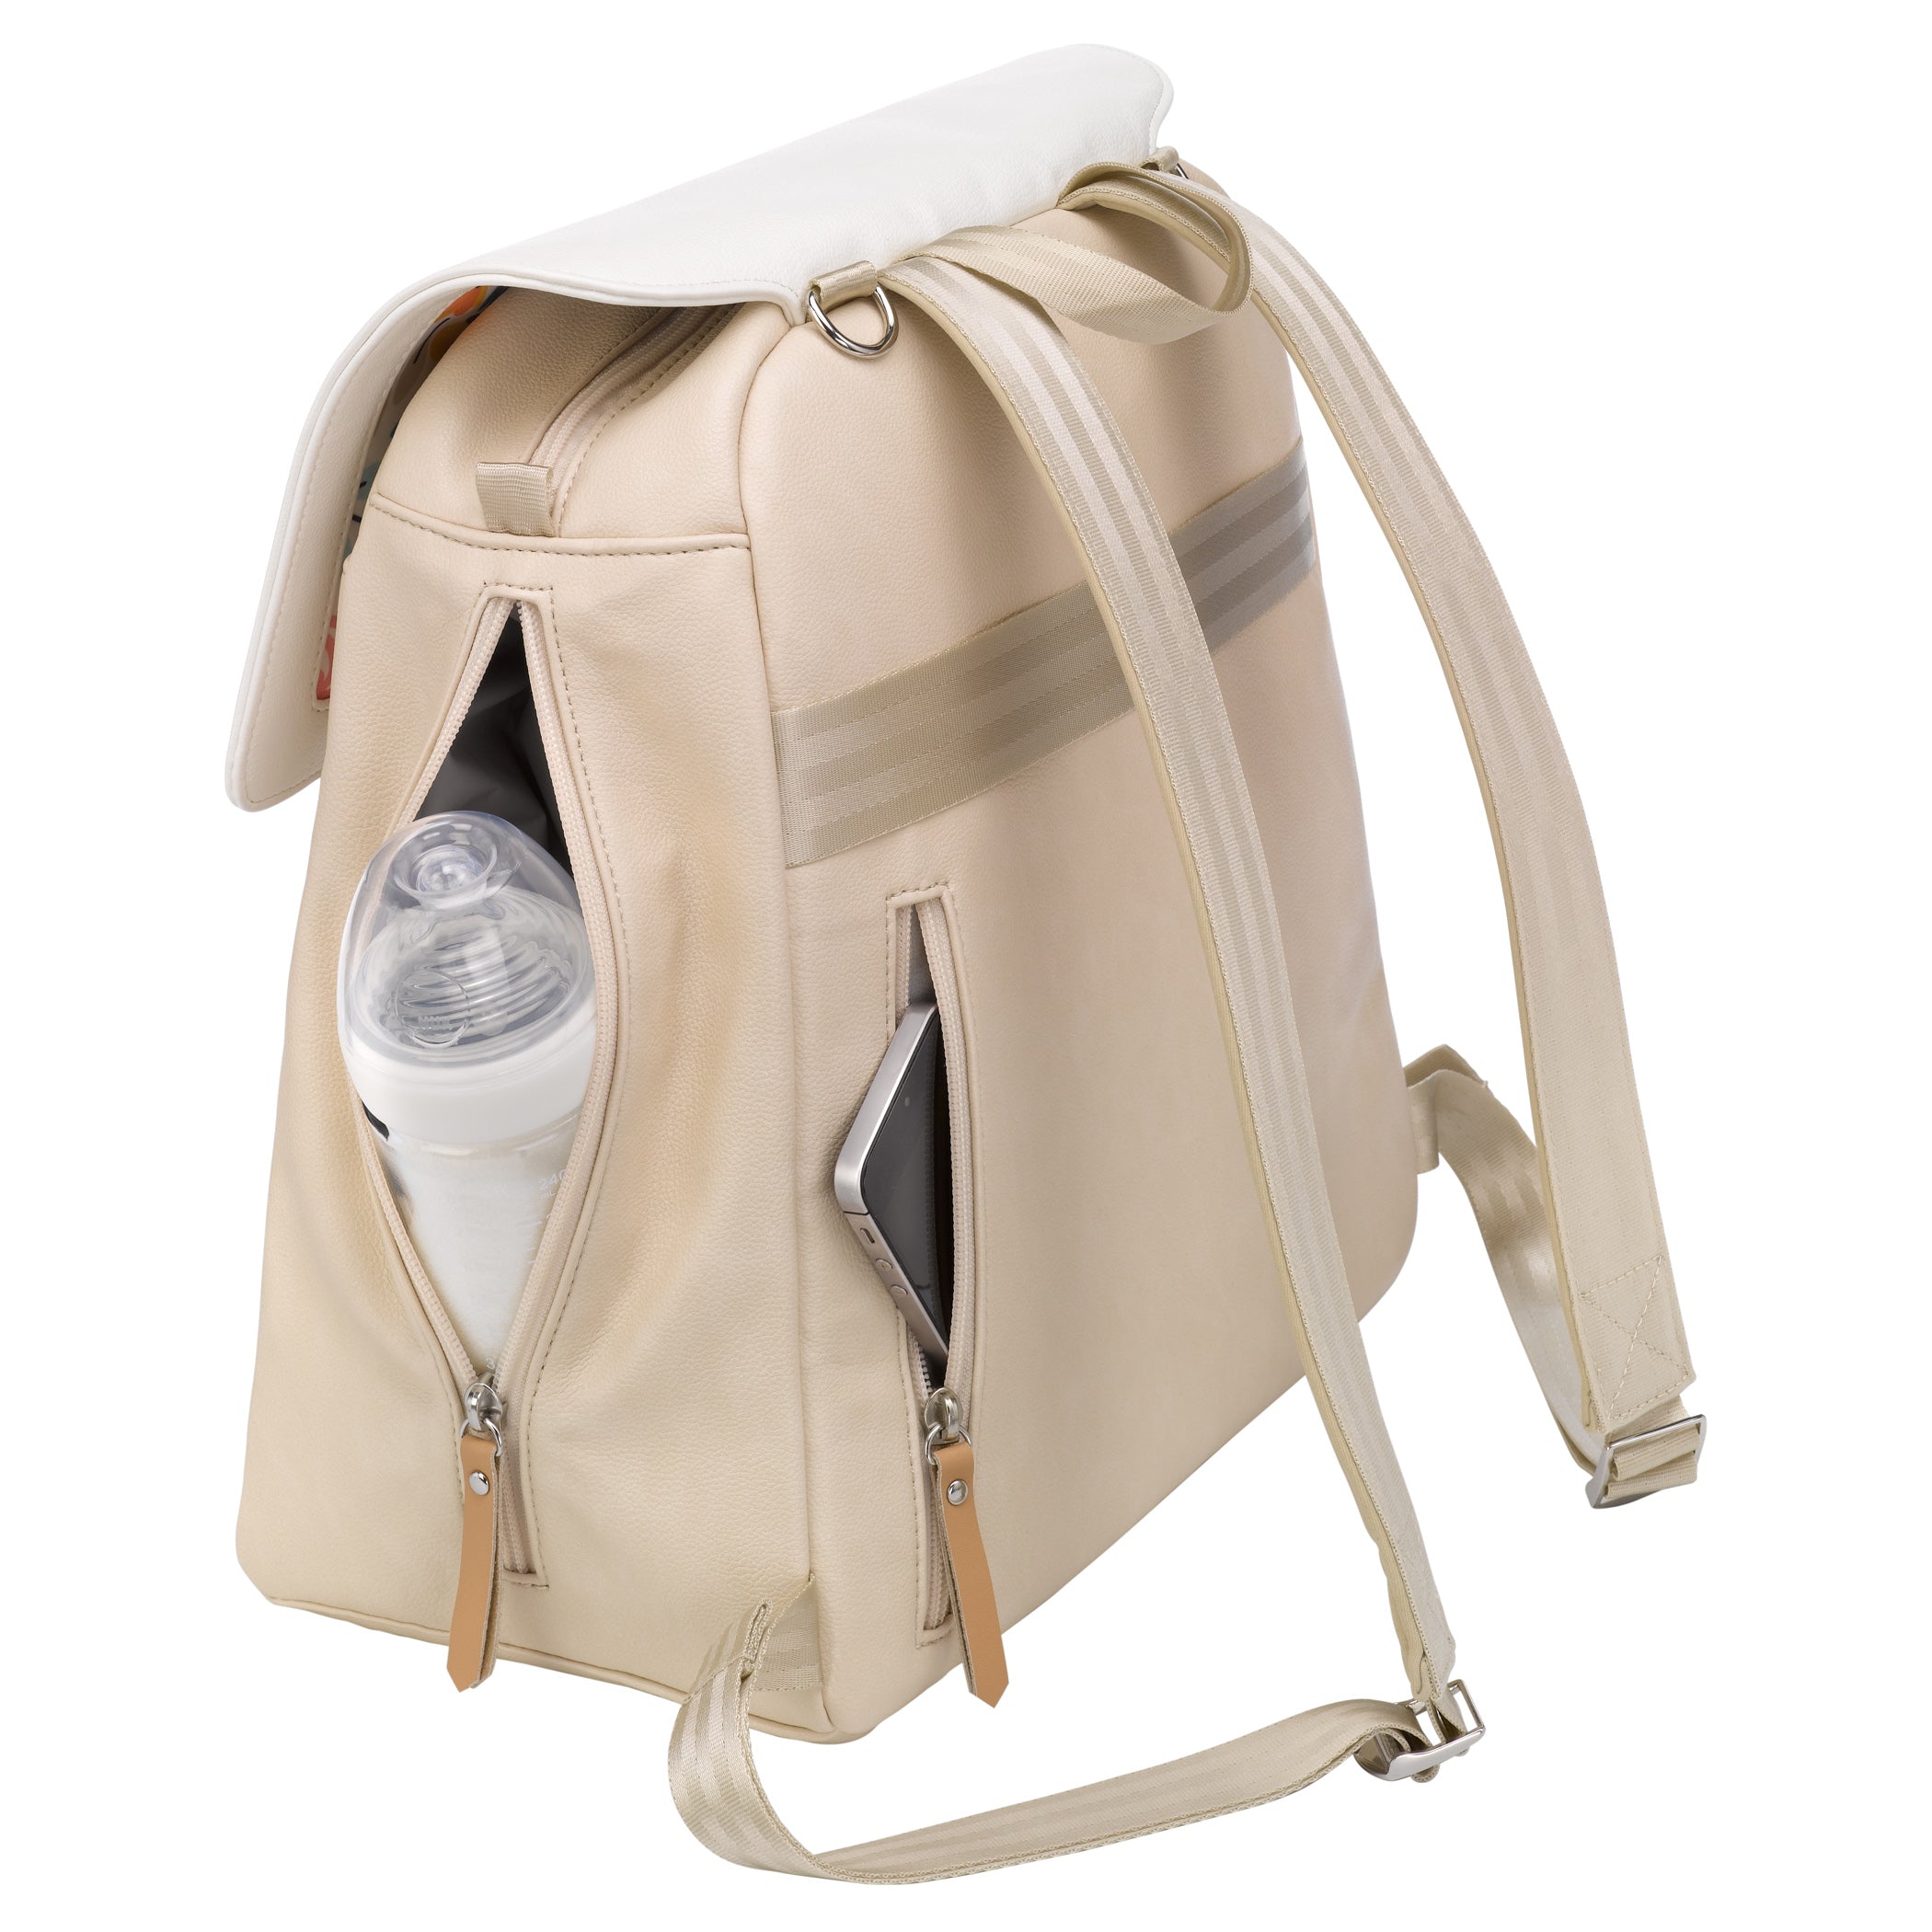 Petunia Pickle Bottom Meta Diaper Backpack in Toasted Marshmallow